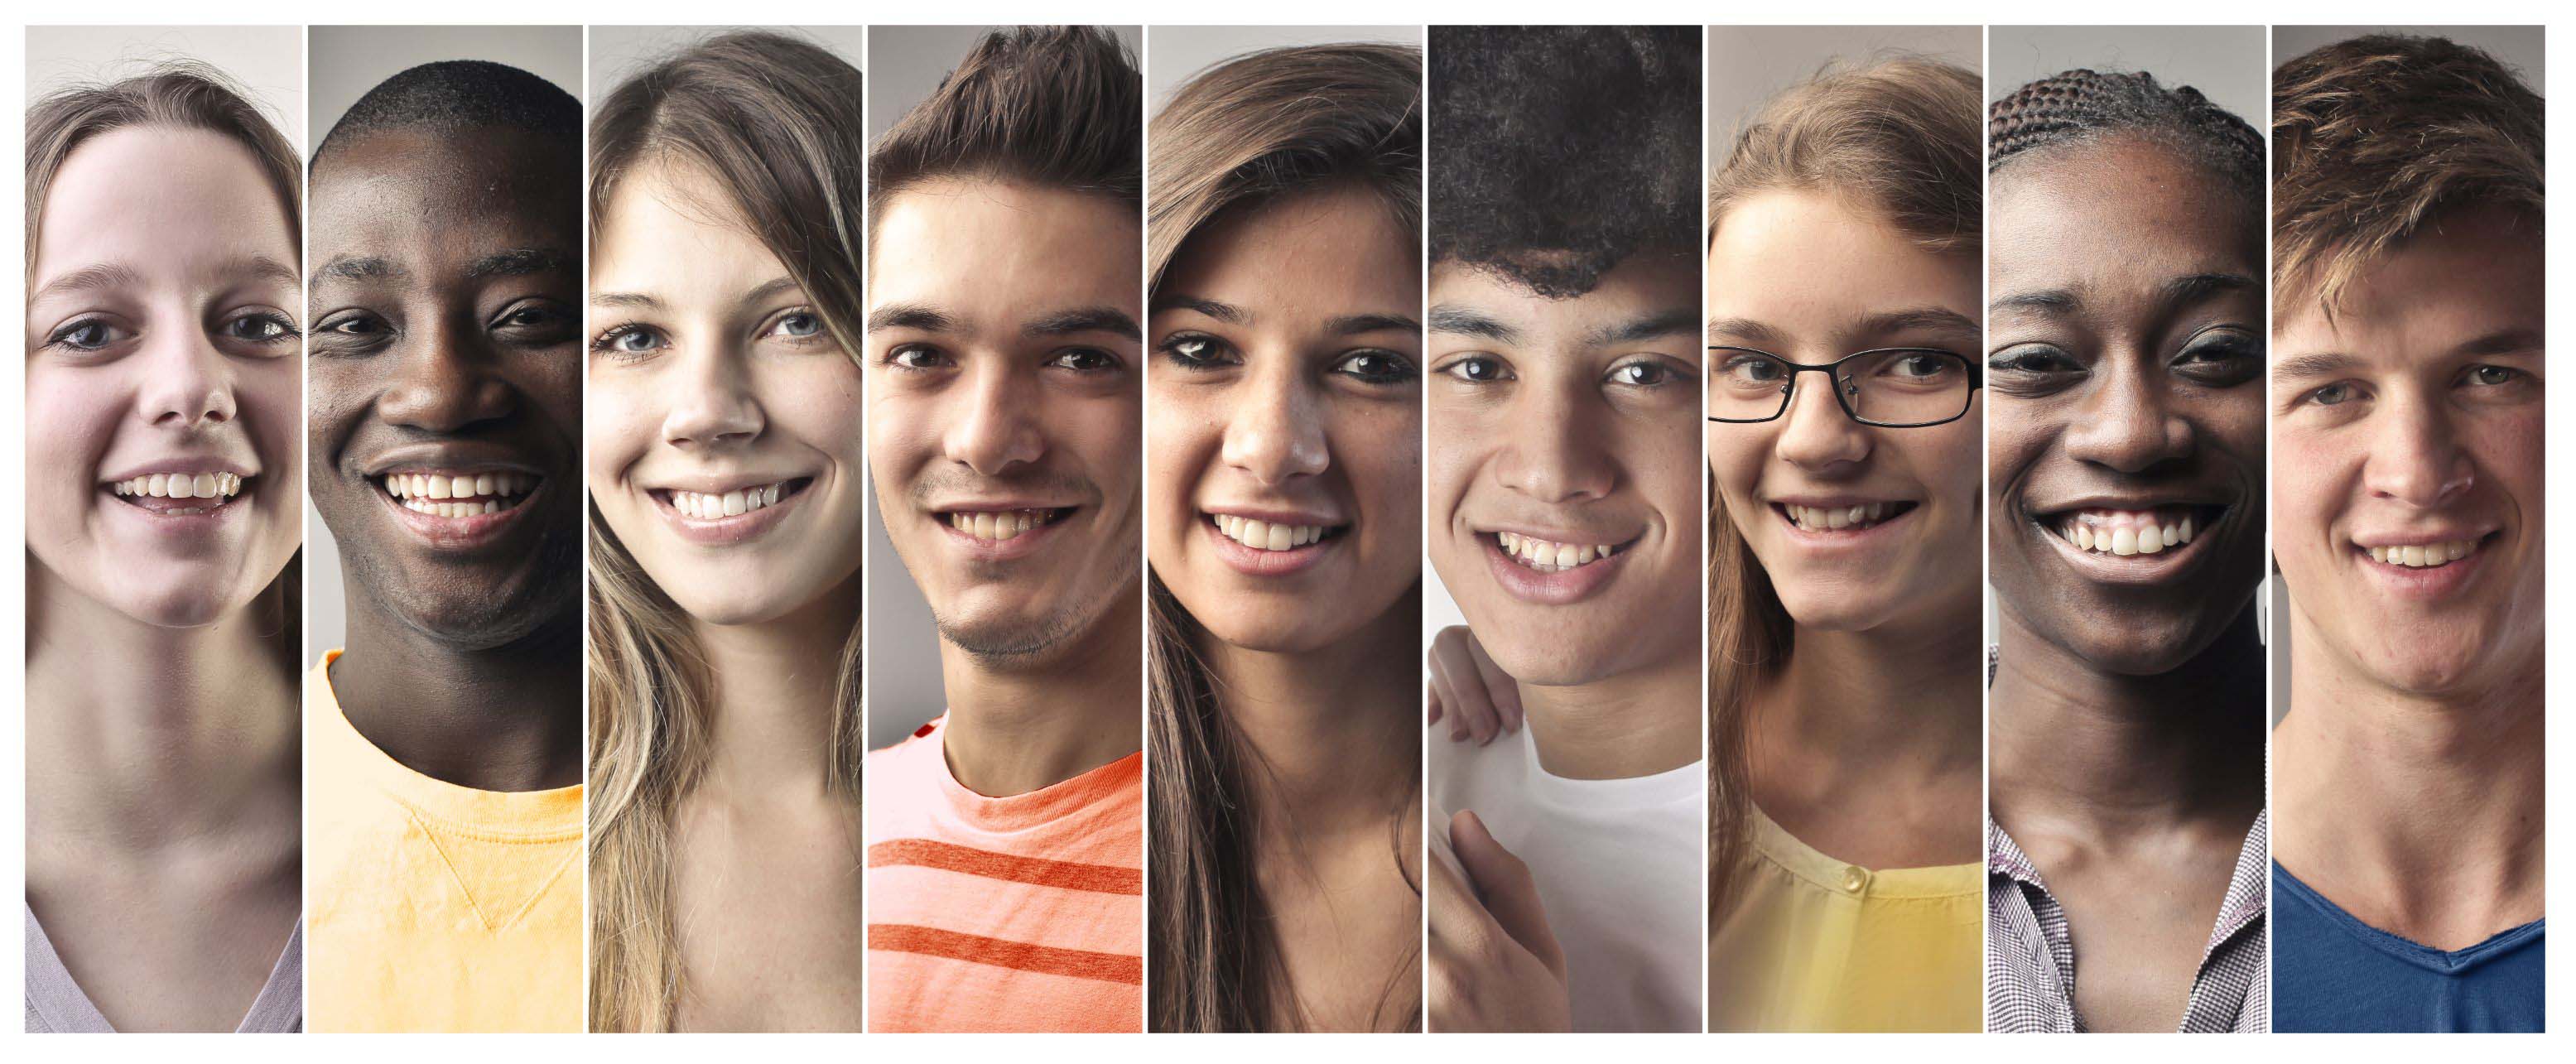 Collage showing 9 young adults of diverse races and genders